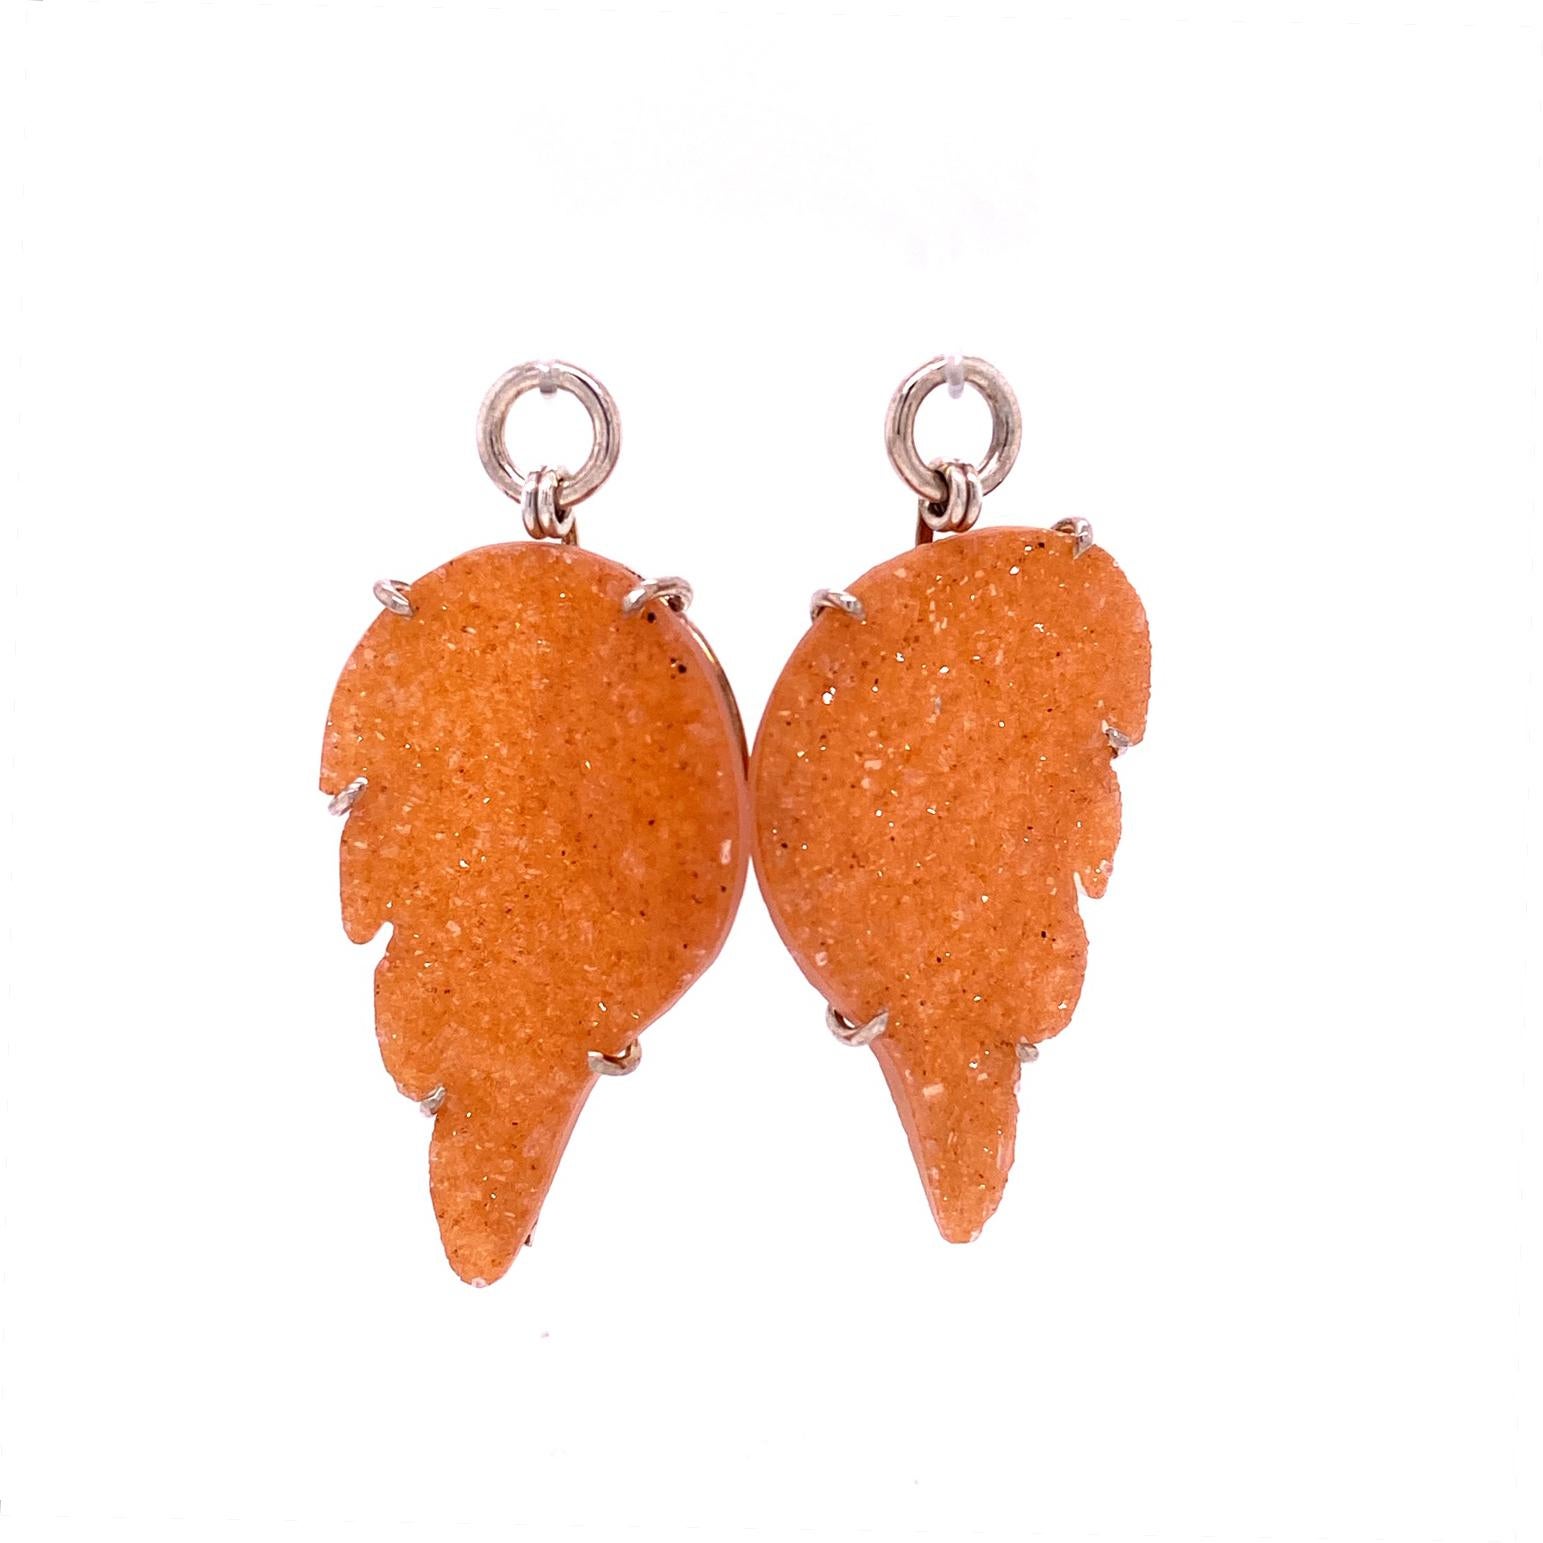 A pair of reversible 18k yellow and white gold huggie hoops, with a pair of peach druzy wing jackets set in sterling silver. These earrings were made and designed by llyn strong.
Items sold separately upon request.
